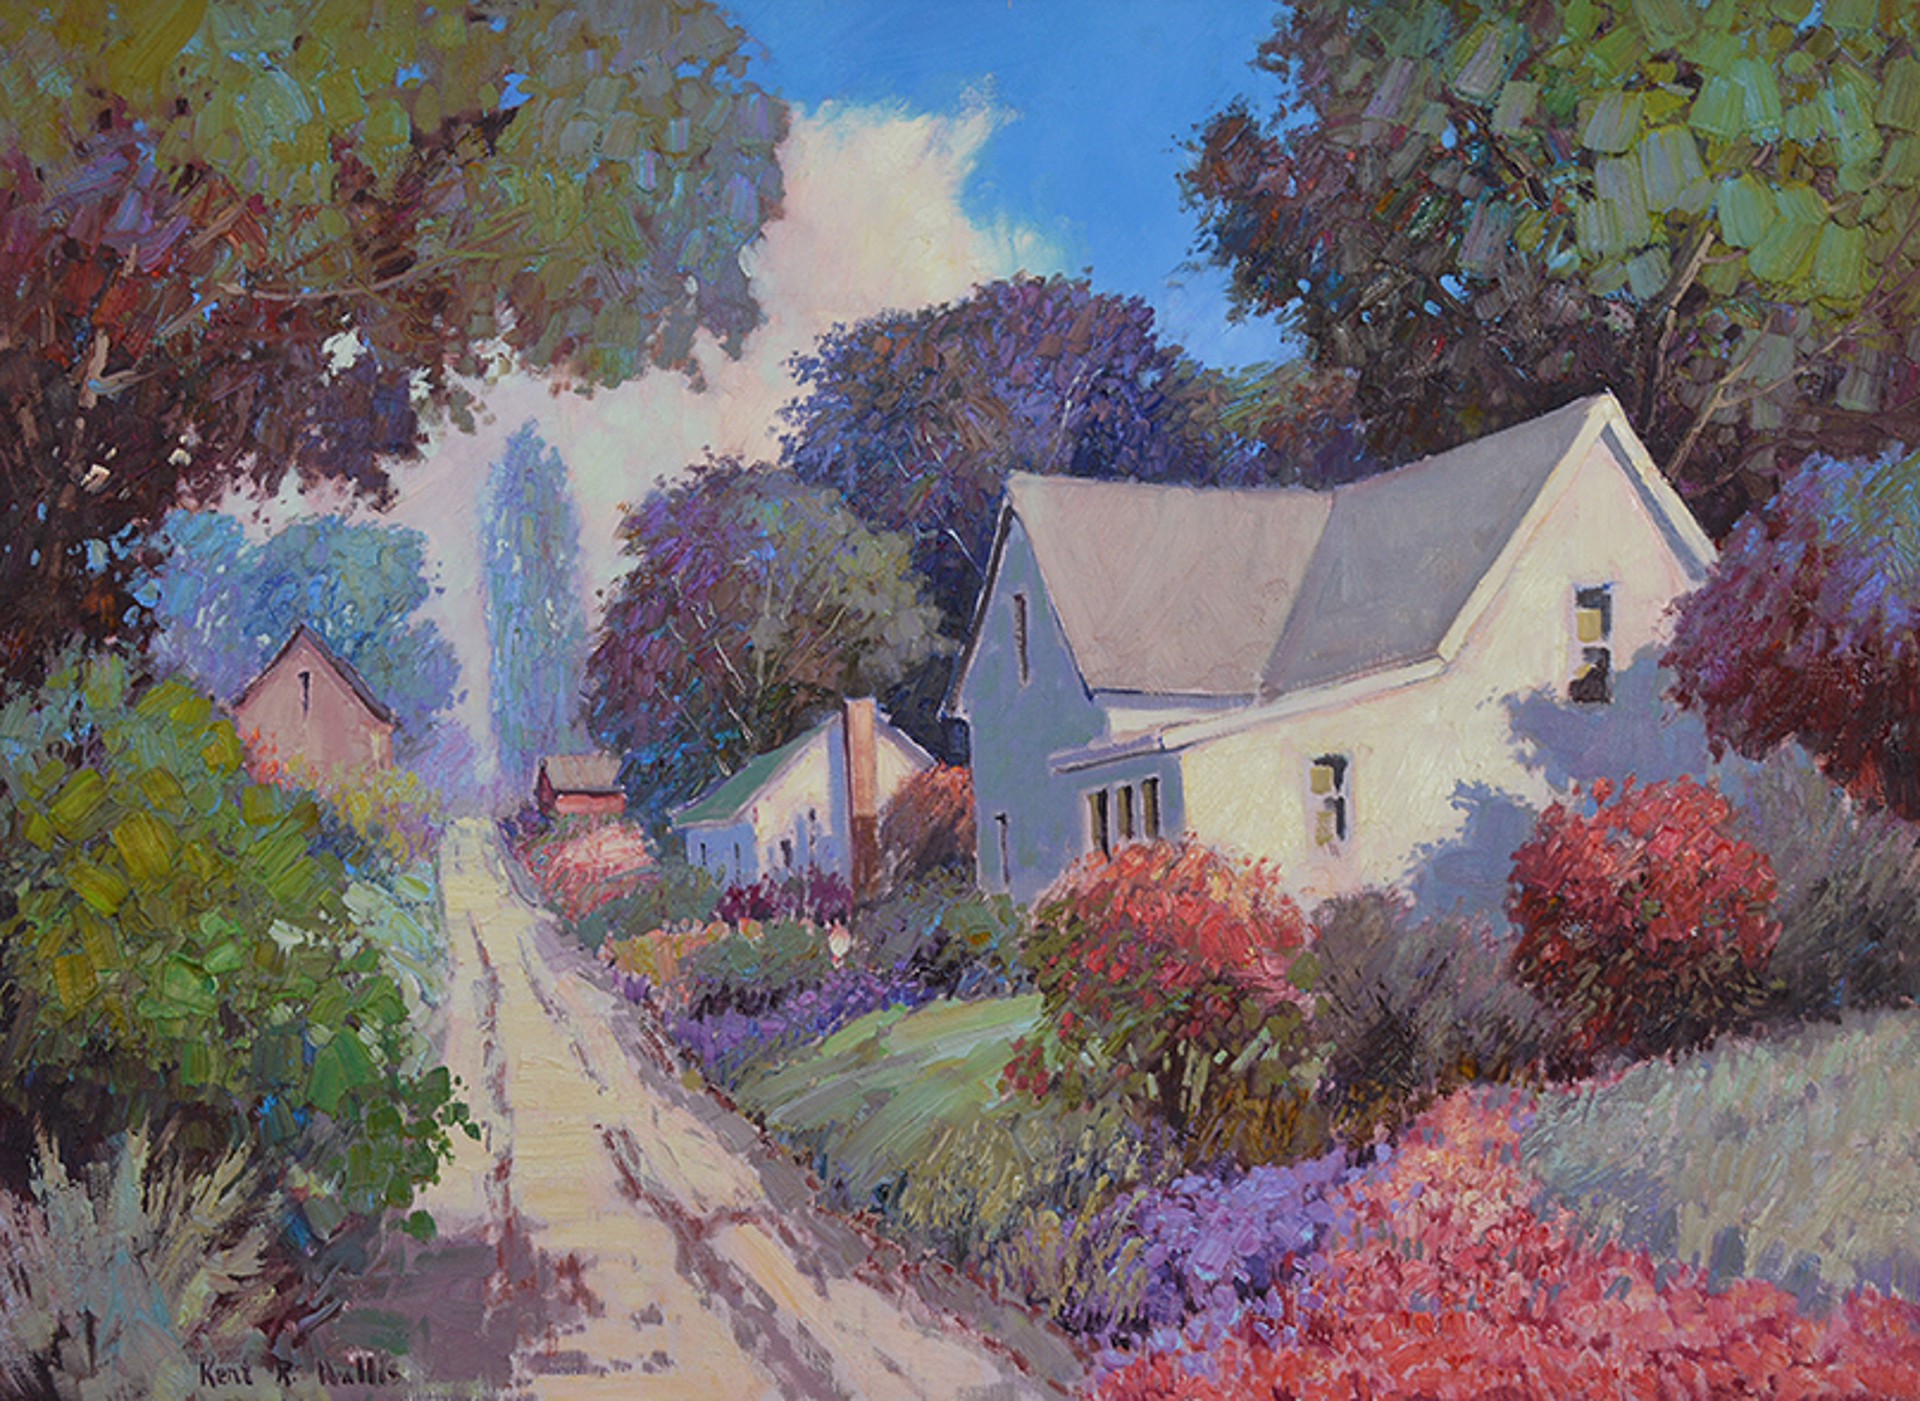 Down The Road by Kent Wallis